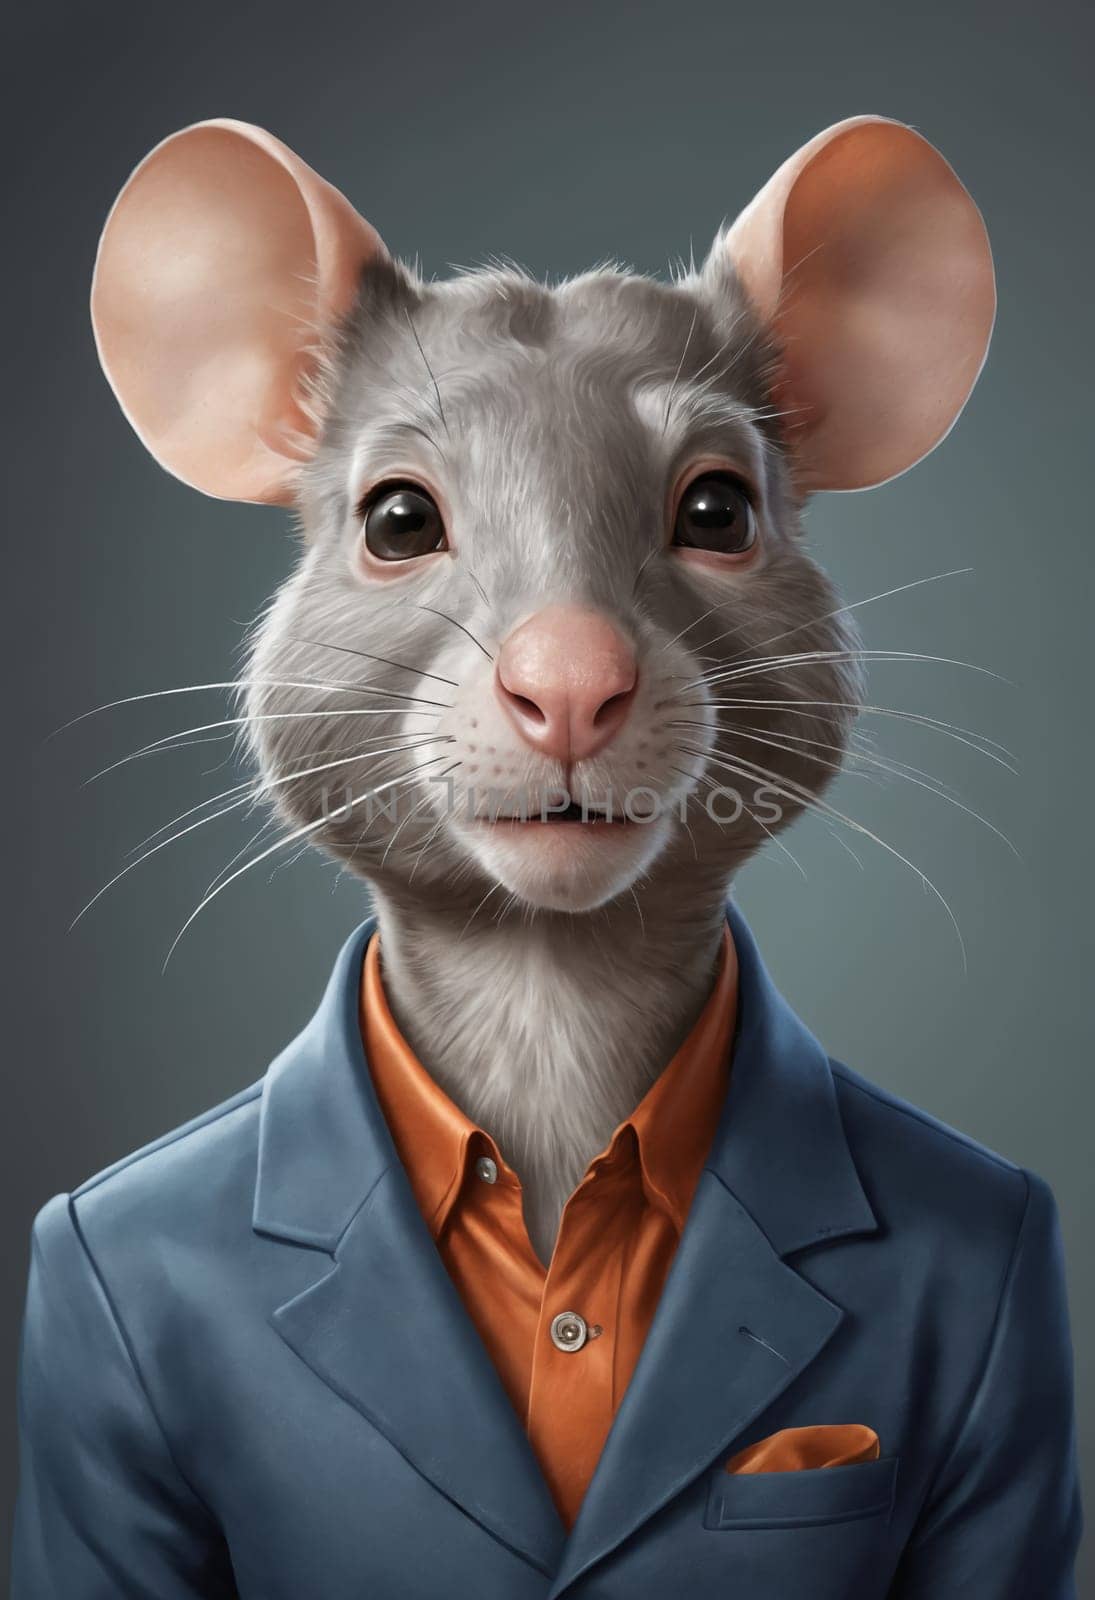 This rat exudes boardroom authority in a well-tailored suit, adding a touch of fun to formality.